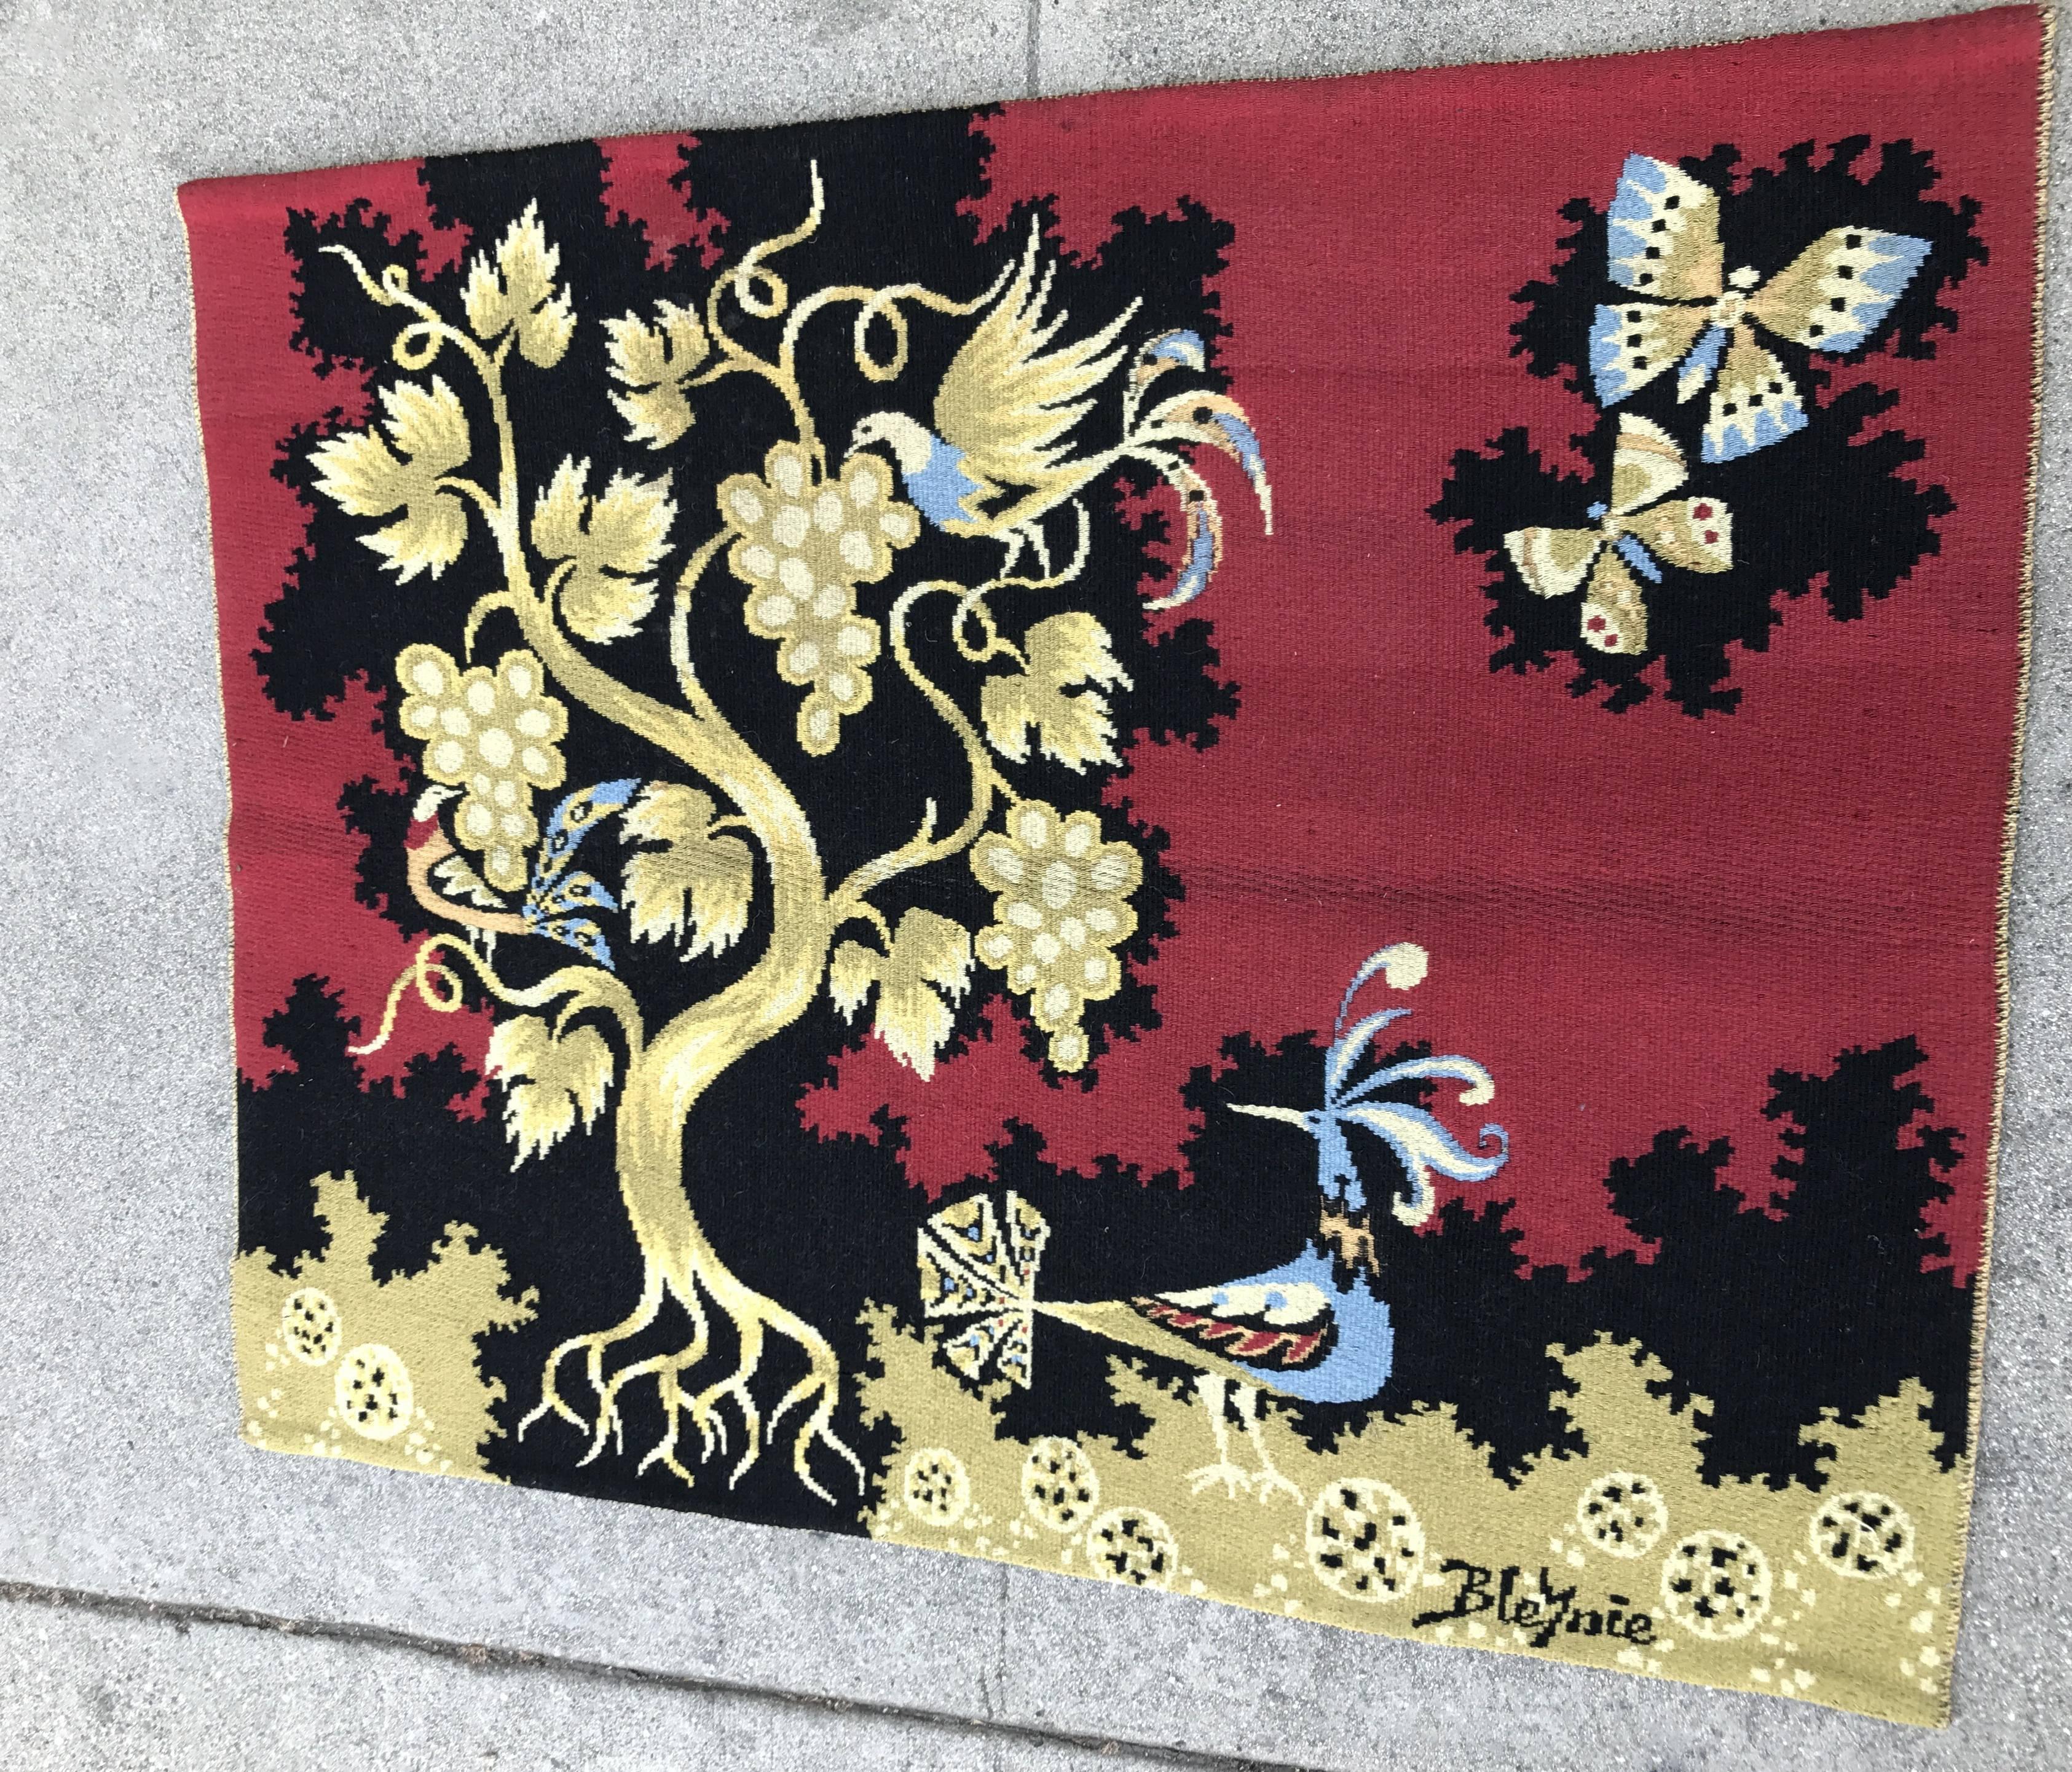 Claude Bleynie was a French artist, born in 1923. He discovered the art of tapestry with Jean Picart Le Doux in 1952.
Red wool handwoven tapestry with an intricate design of vines and peacock titled "Vigne D'Or". Made in Ateliers des